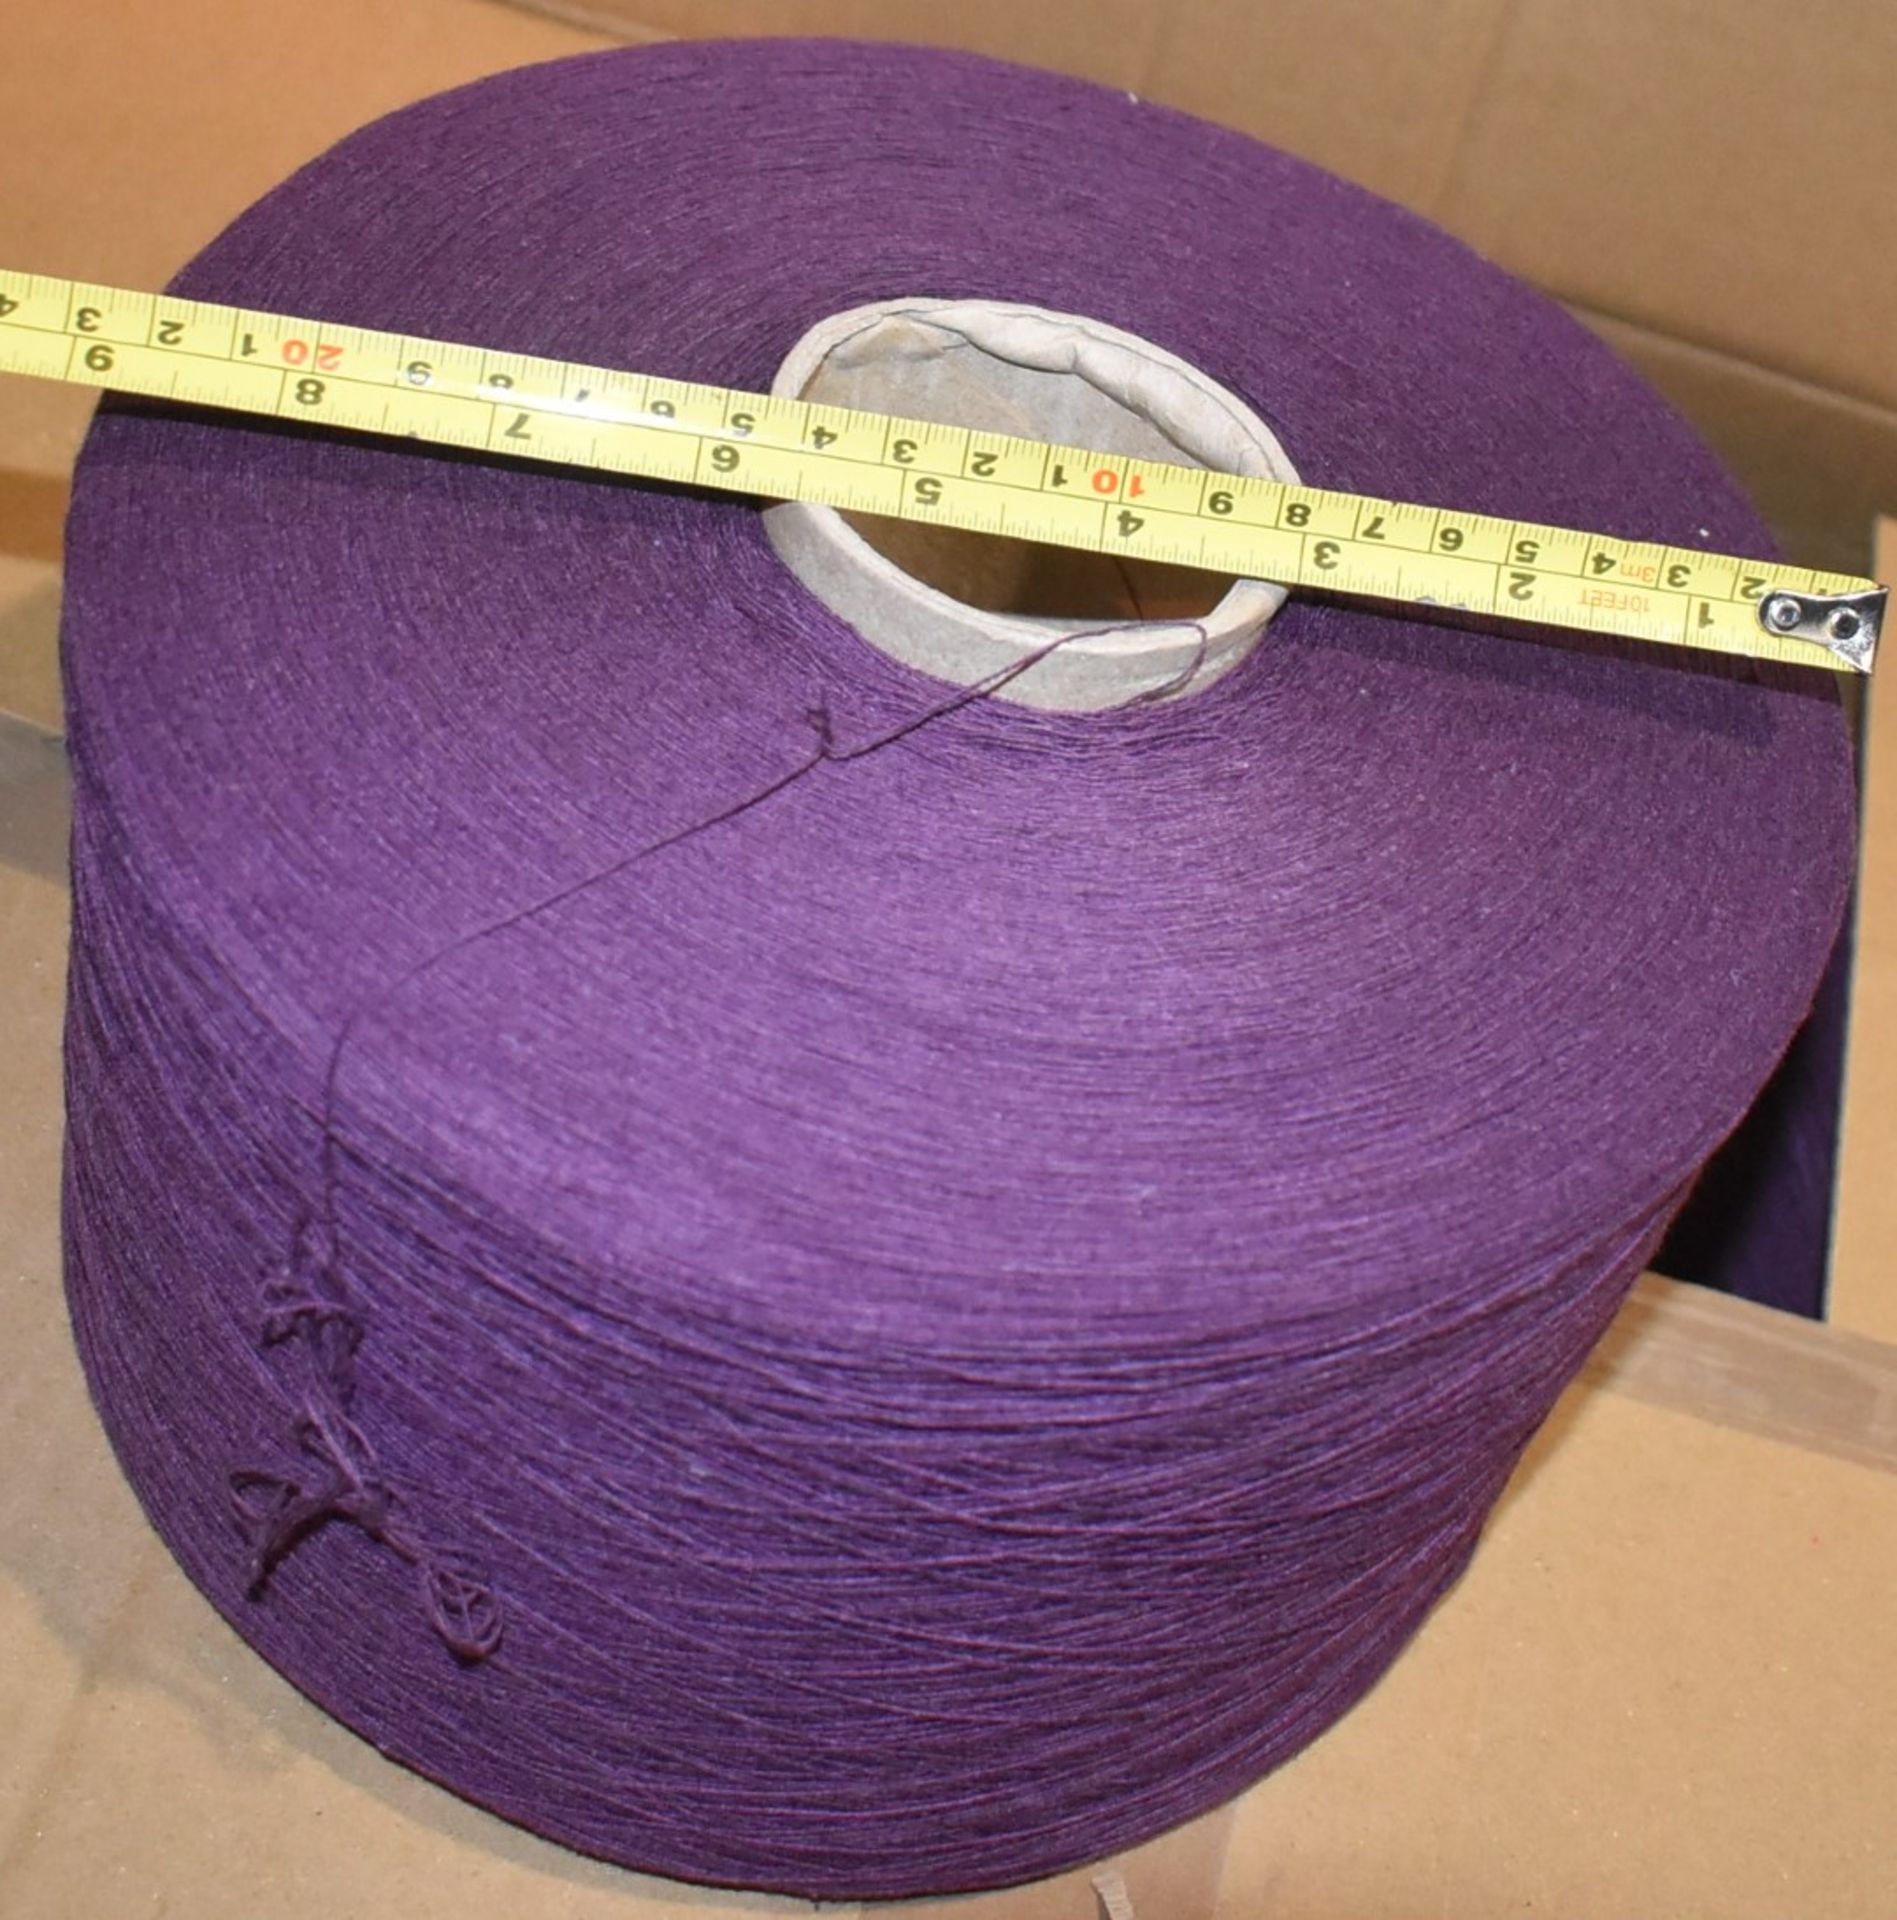 6 x Cones of 1/13 MicroCotton Knitting Yarn - Colour: Purple - Approx Weight: 2,300g - New Stock - Image 7 of 9